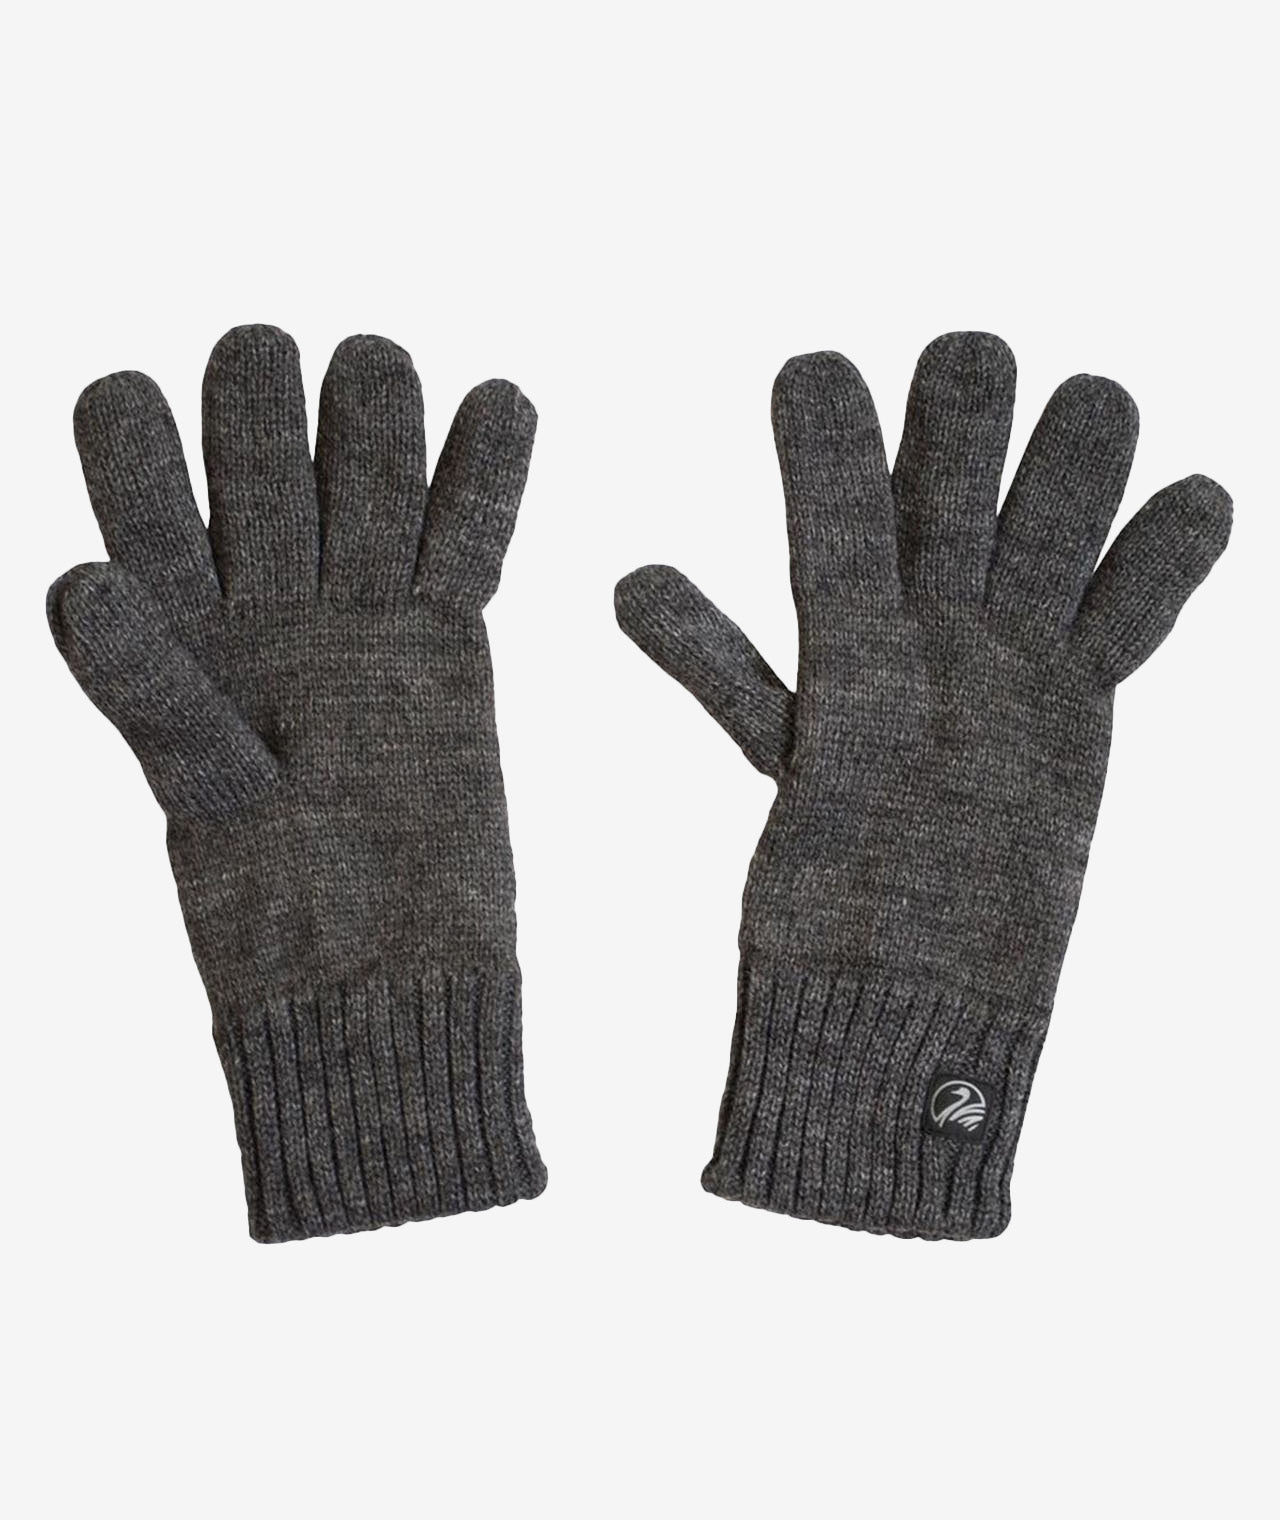 Swanndri Gloves - L-XL / CHARCOAL MARLE - Mansfield Hunting & Fishing - Products to prepare for Corona Virus